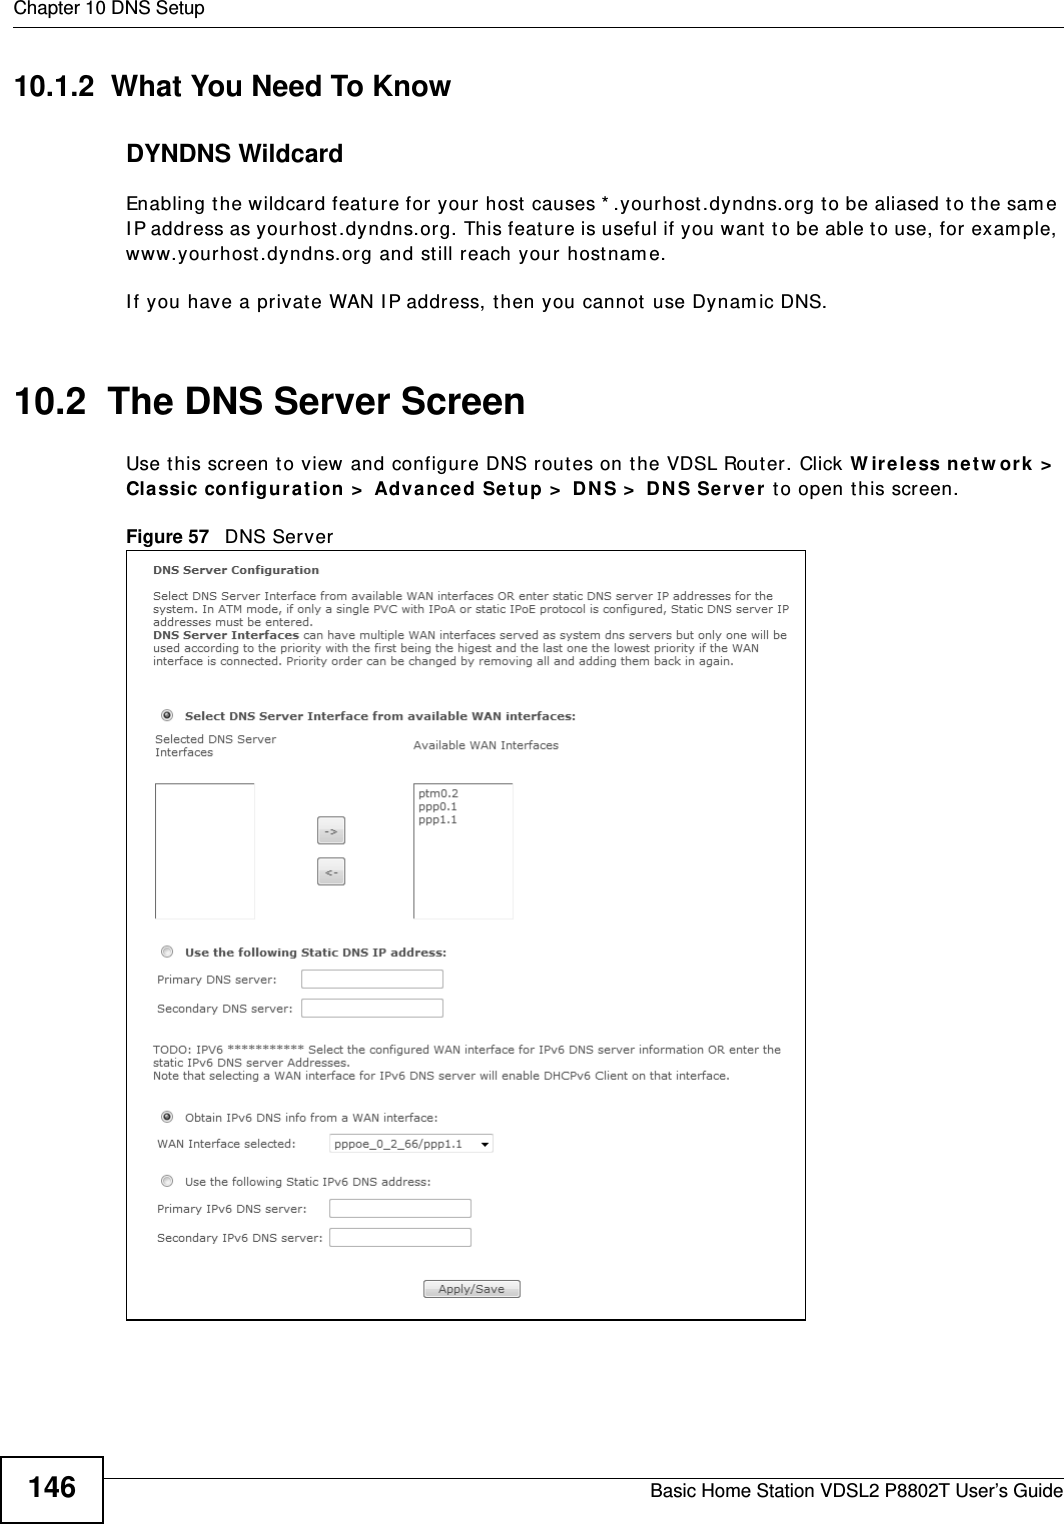 Chapter 10 DNS SetupBasic Home Station VDSL2 P8802T User’s Guide14610.1.2  What You Need To KnowDYNDNS WildcardEnabling t he wildcard feature for  your host  causes * .yourhost .dyndns.org to be aliased to t he sam e I P address as yourhost.dyndns.org. This feature is useful if you want to be able t o use, for exam ple, www.yourhost .dyndns.org and st ill reach your host nam e.I f you have a privat e WAN I P address, then you cannot use Dynam ic DNS.10.2  The DNS Server ScreenUse t his screen to view and configur e DNS routes on t he VDSL Router. Click W ire less ne t w or k &gt;  Classic con figura t ion &gt;  Adva nced Se t up &gt;  DN S &gt;  DN S Ser ver  t o open t his screen.Figure 57   DNS Server